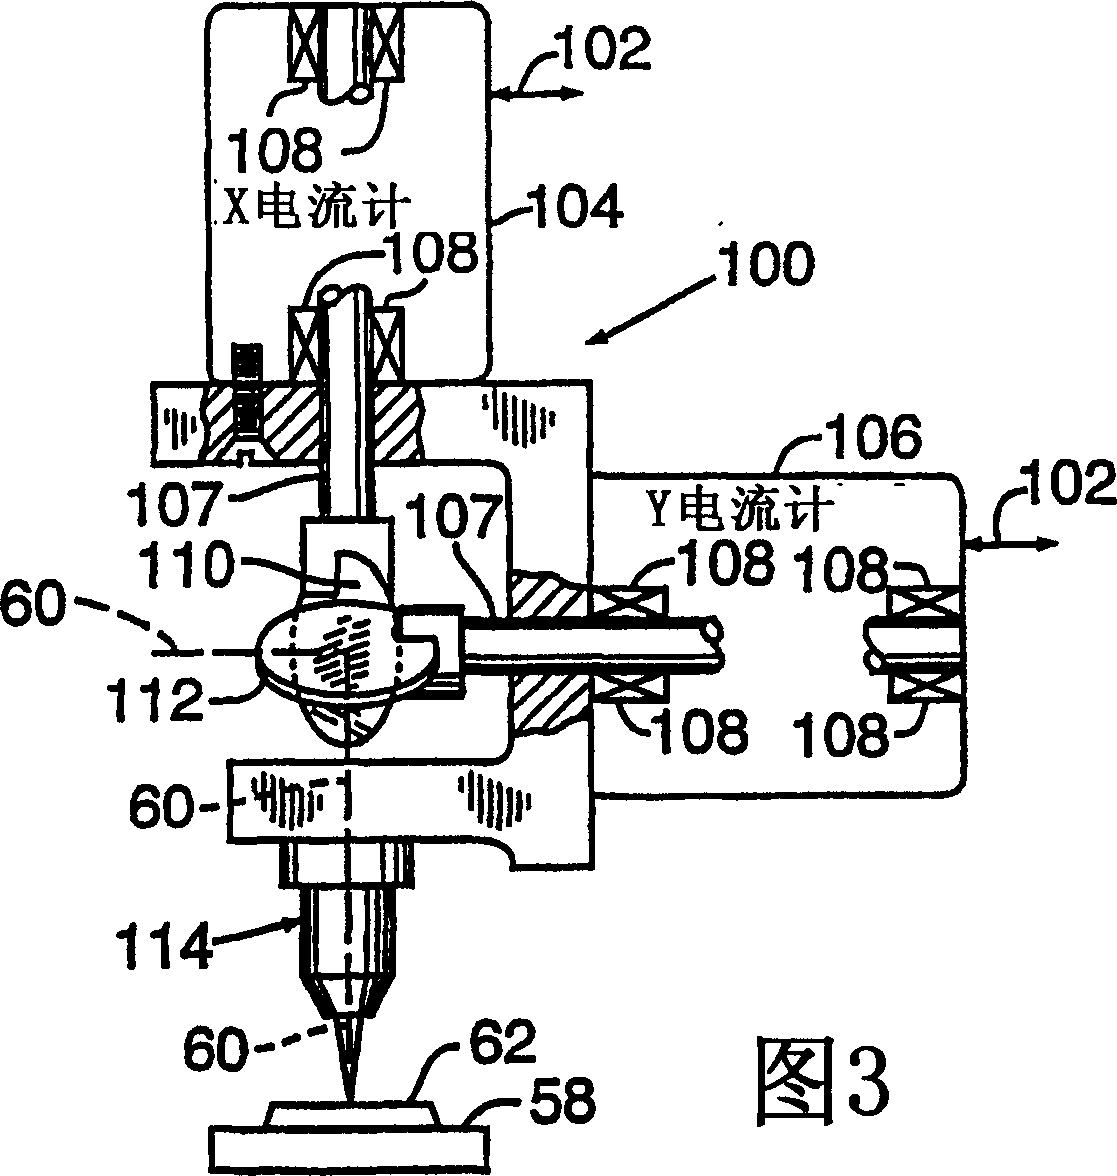 Abbe error correction system and method